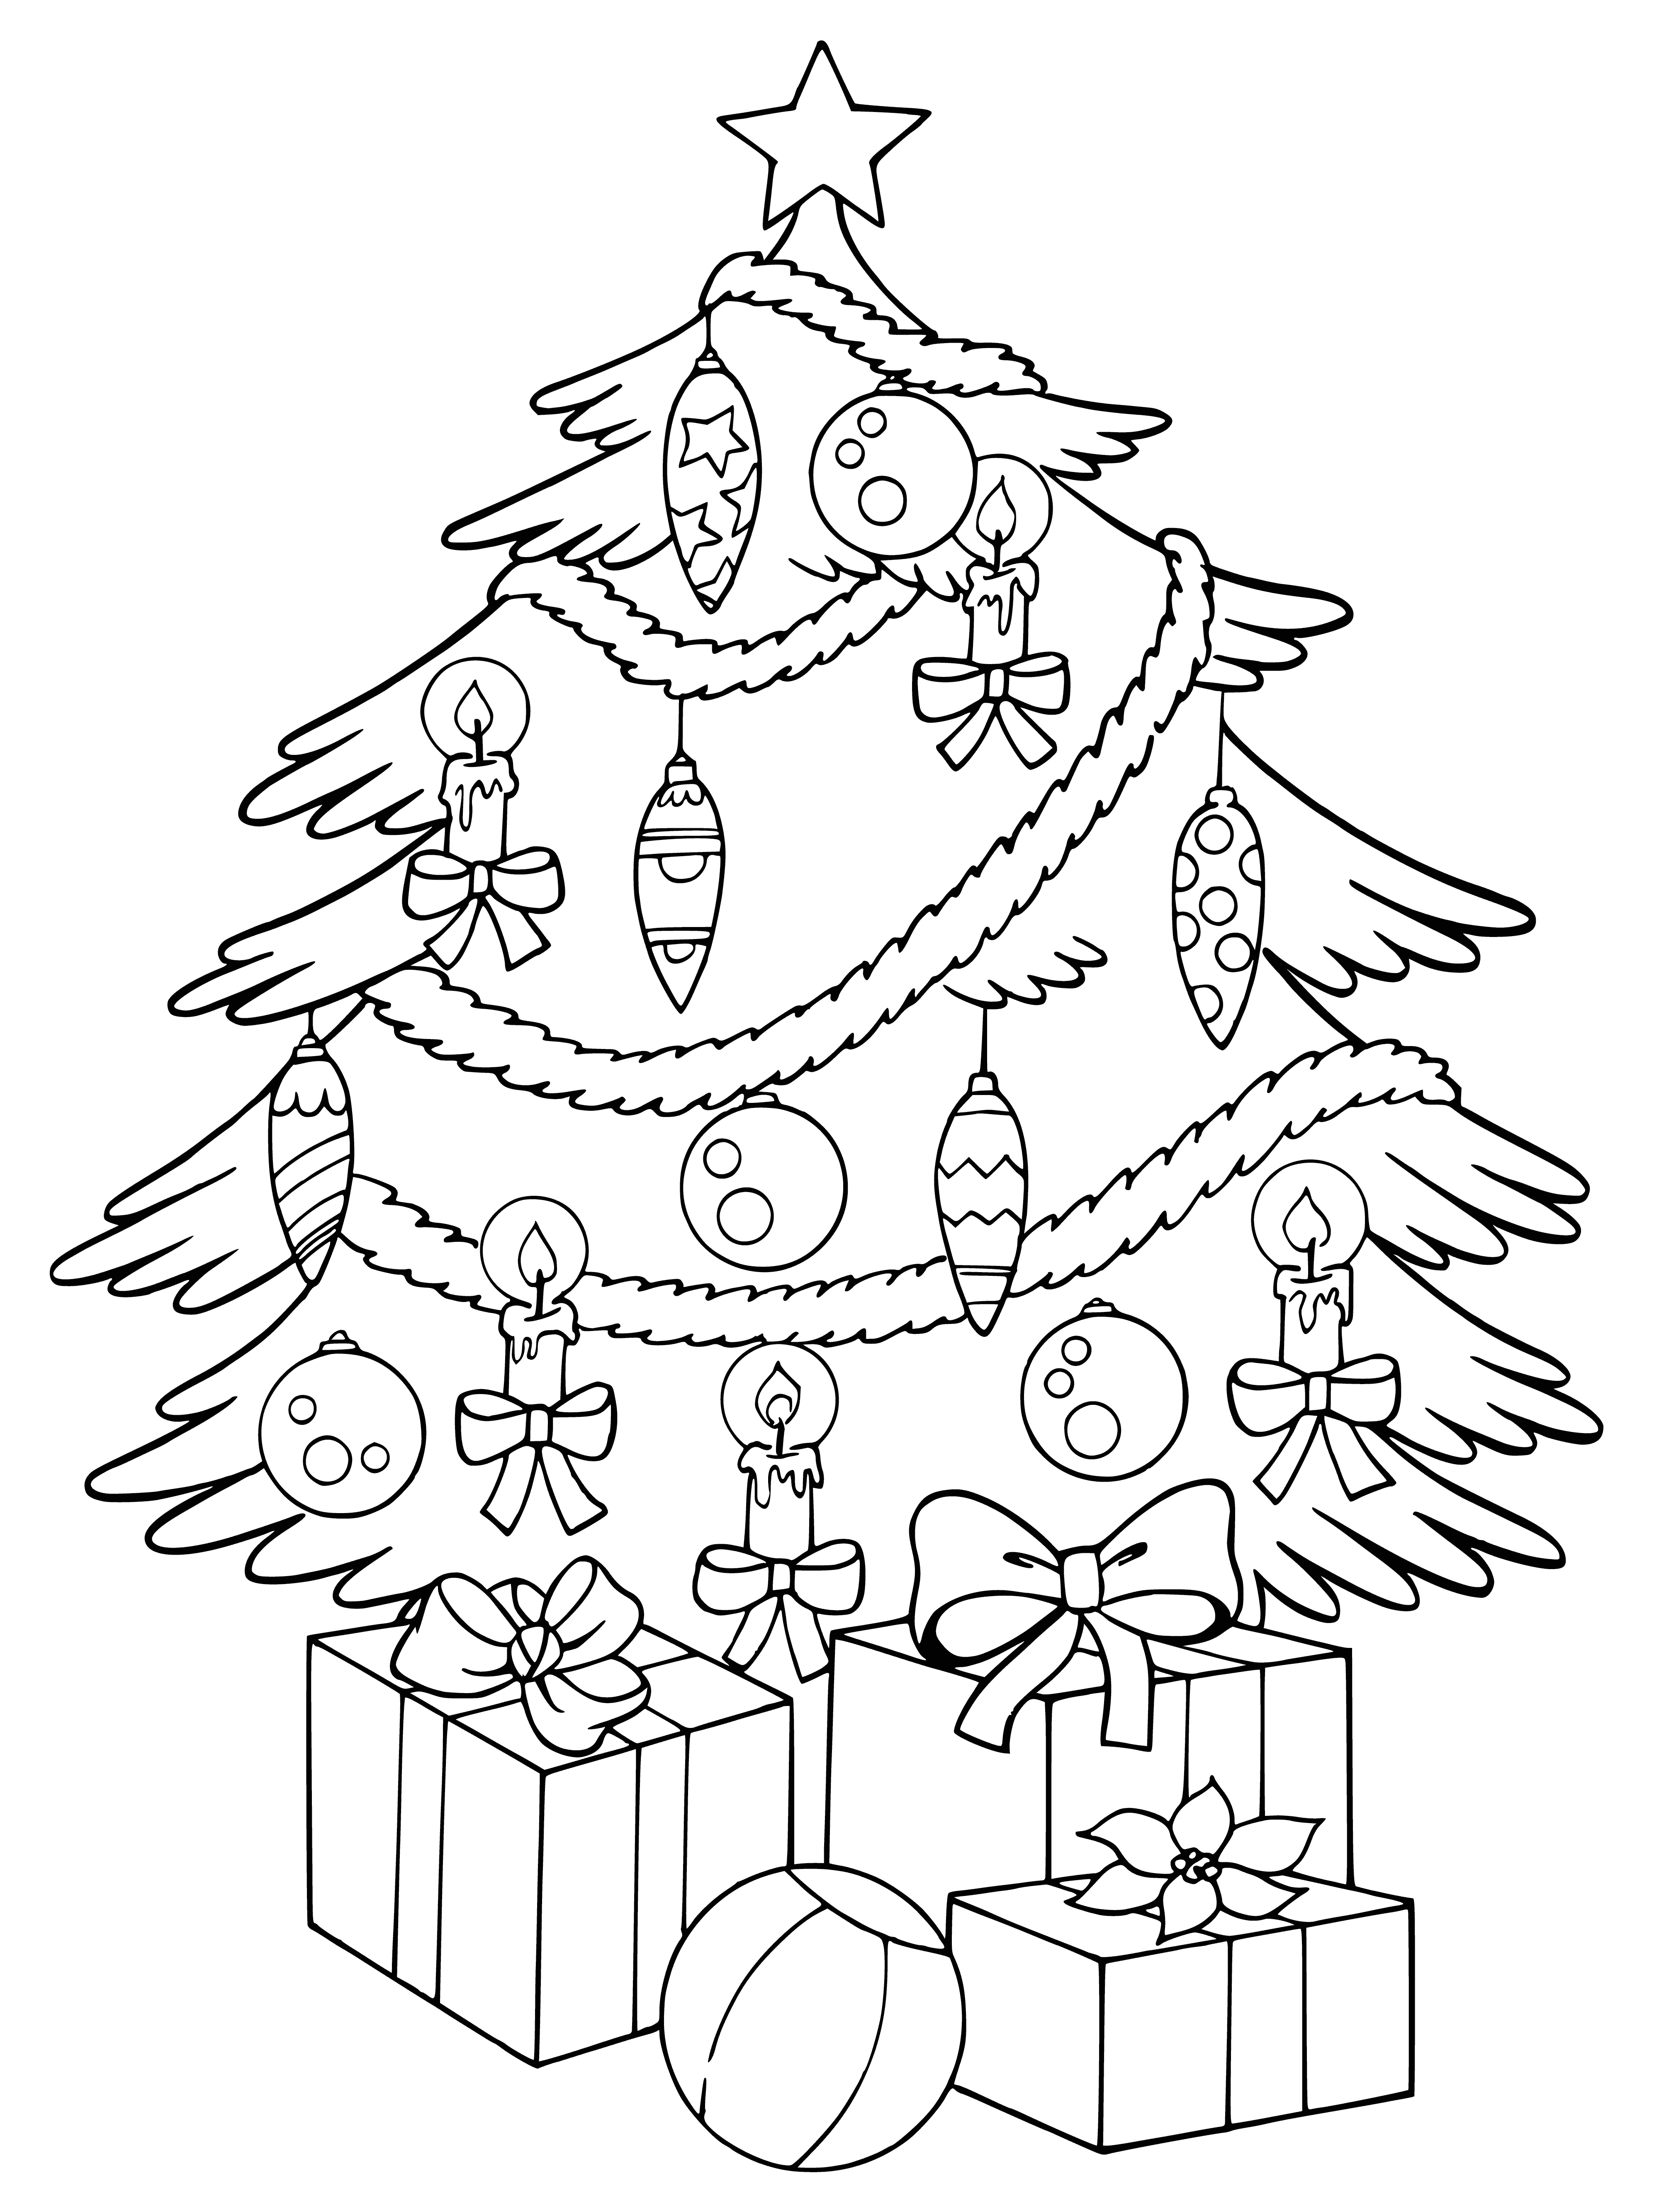 Coloring pages depict a beautiful tree adorned with ornaments, topped with a star, in traditional Christmas colors.